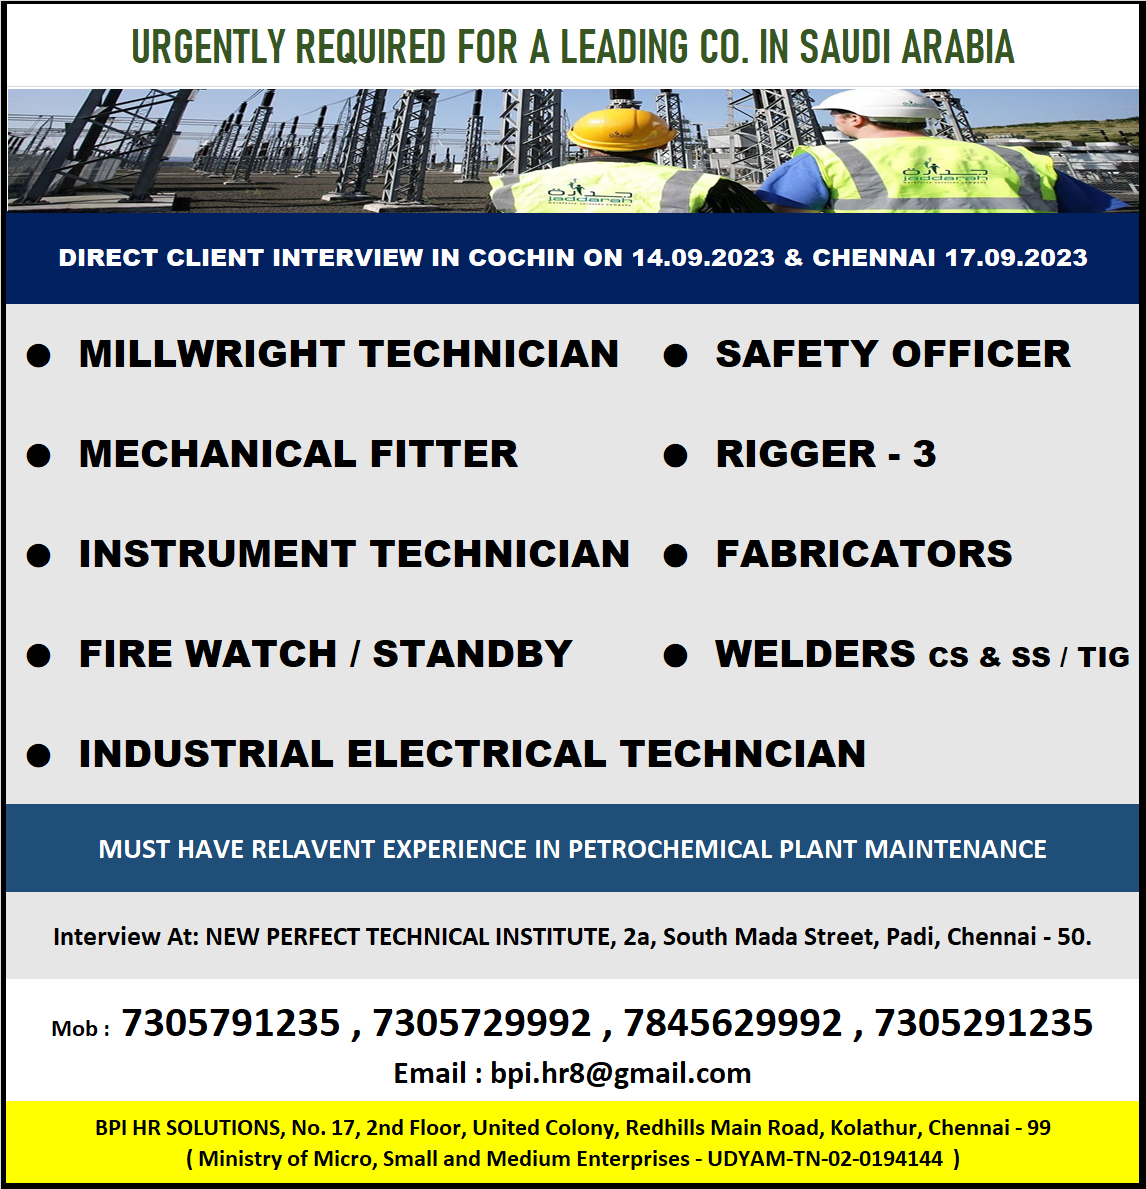 URGENTLY REQUIRED FOR A LEADING CO. IN KSA CLIENT INTERVIEW IN COCHIN 14.09.2023 & CHENNAI ON 17.09.2023